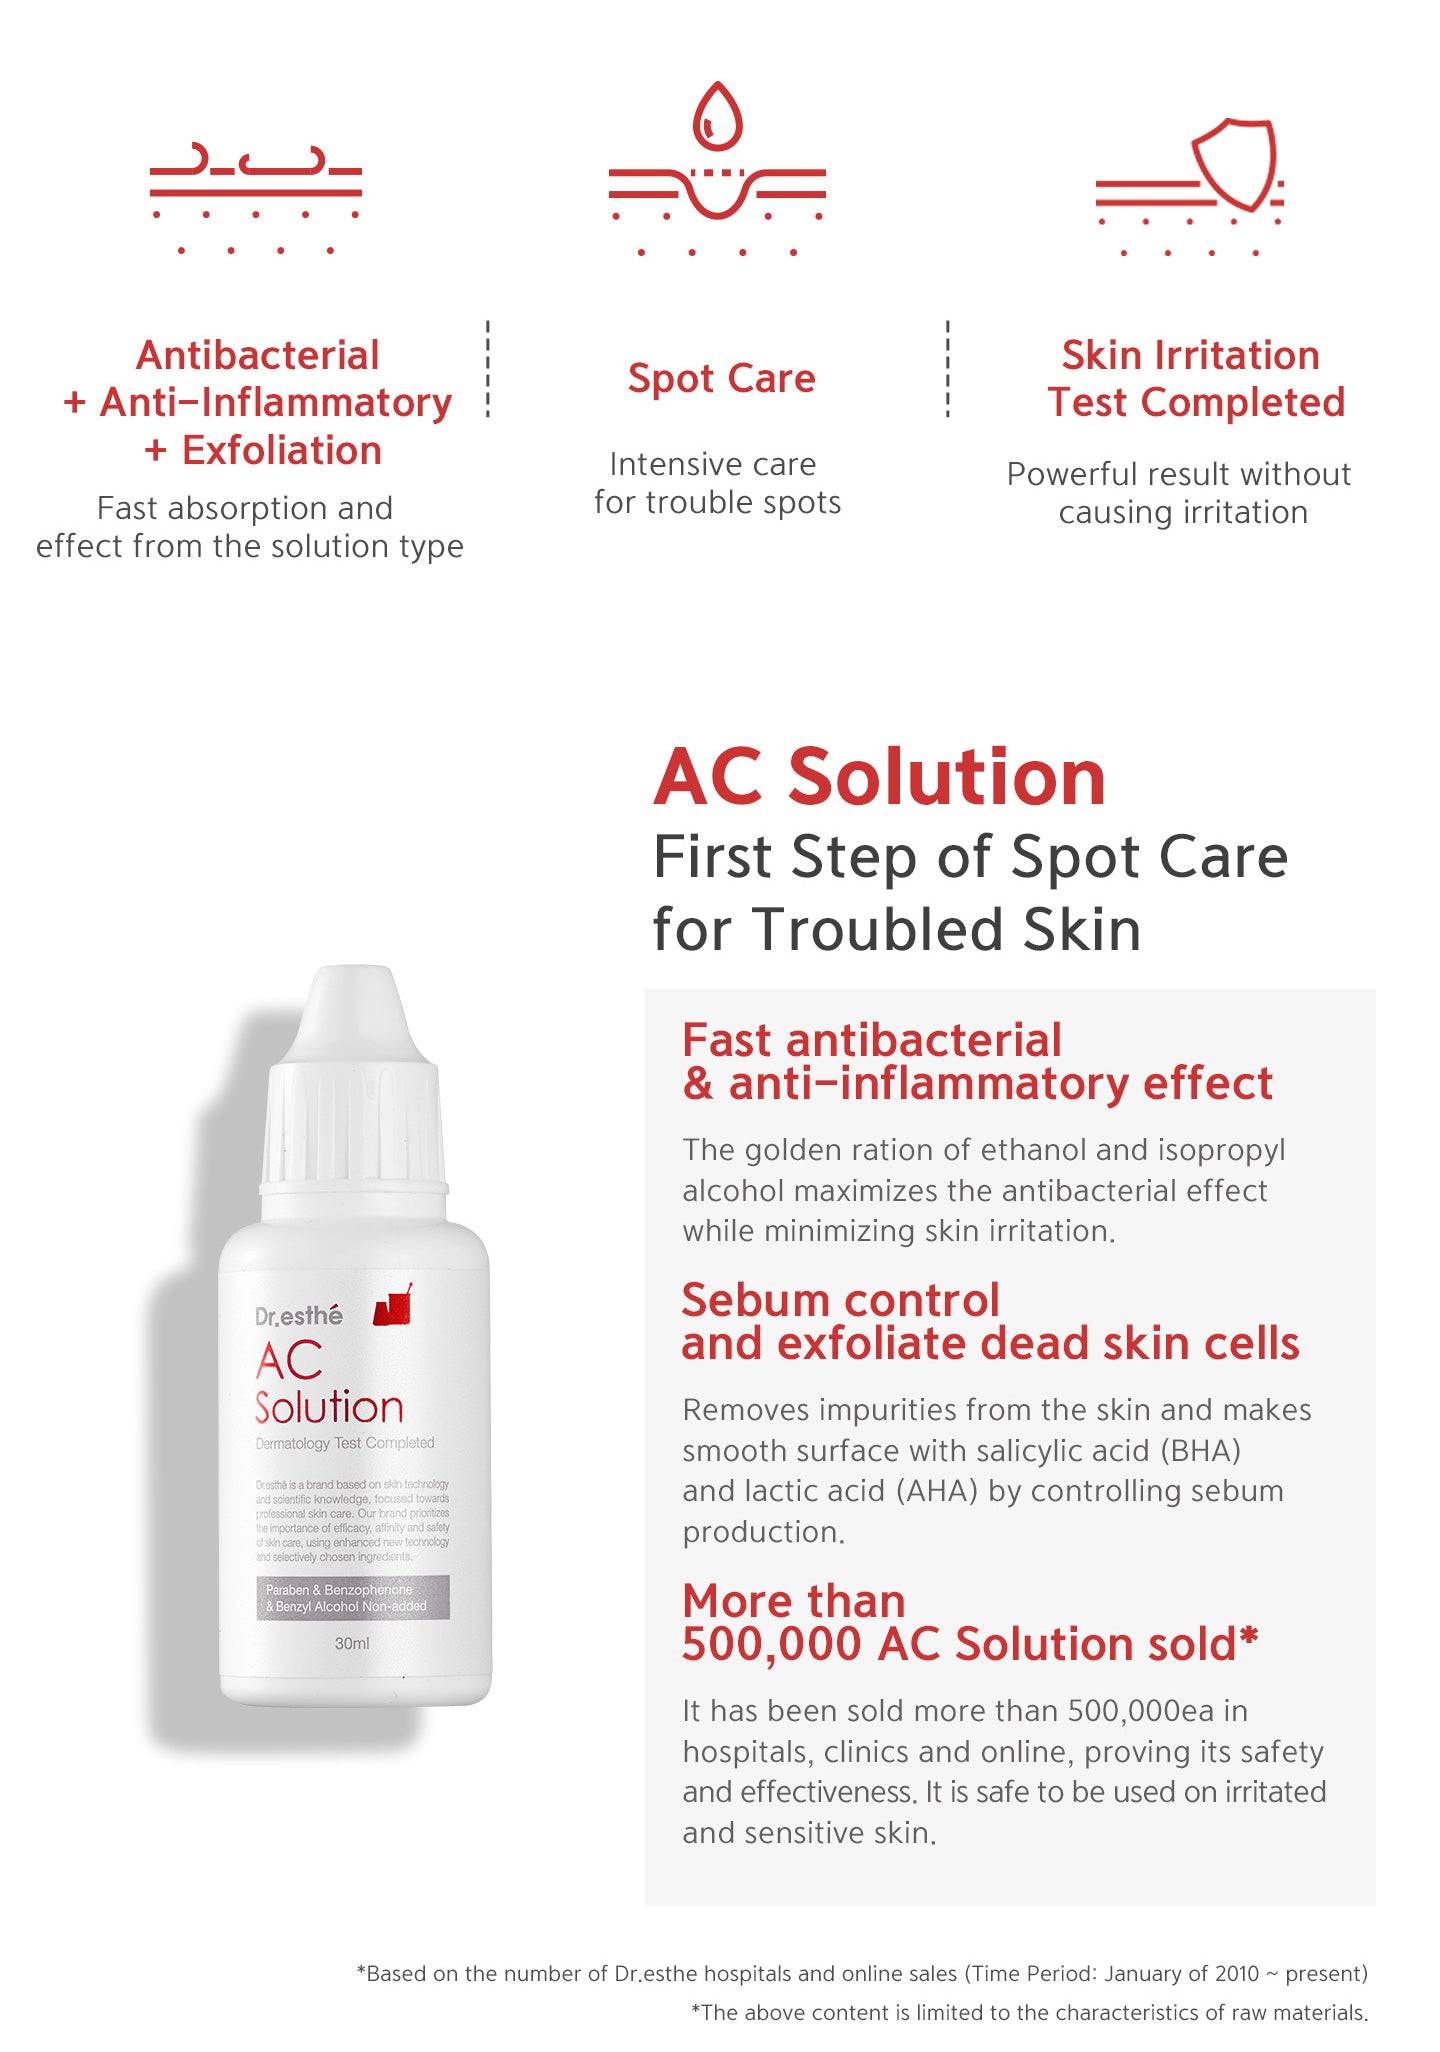 AC solution is the first step of spot care for troubled skin. Fast antibacterial & anti-inflammatory effect. Sebum control and exfoliate dead skin cells. More than 500,000 AC solution sold. Skin irritation test completed. Intensive care for trouble spots.